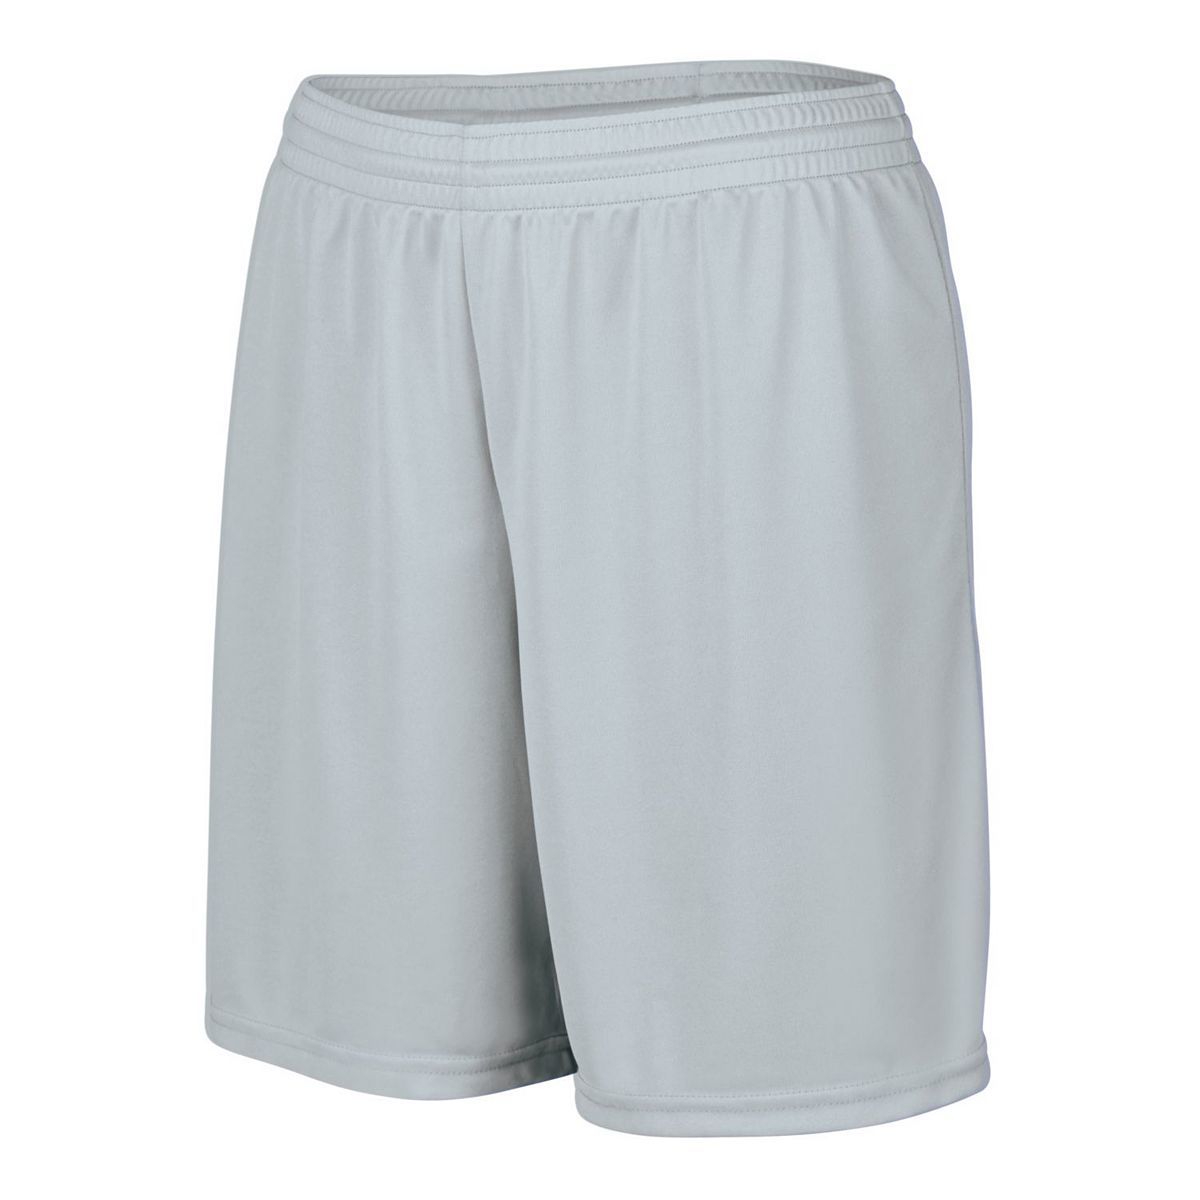 Augusta Sportswear Girls Octane Shorts in Silver  -Part of the Girls, Augusta-Products, Girls-Shorts product lines at KanaleyCreations.com